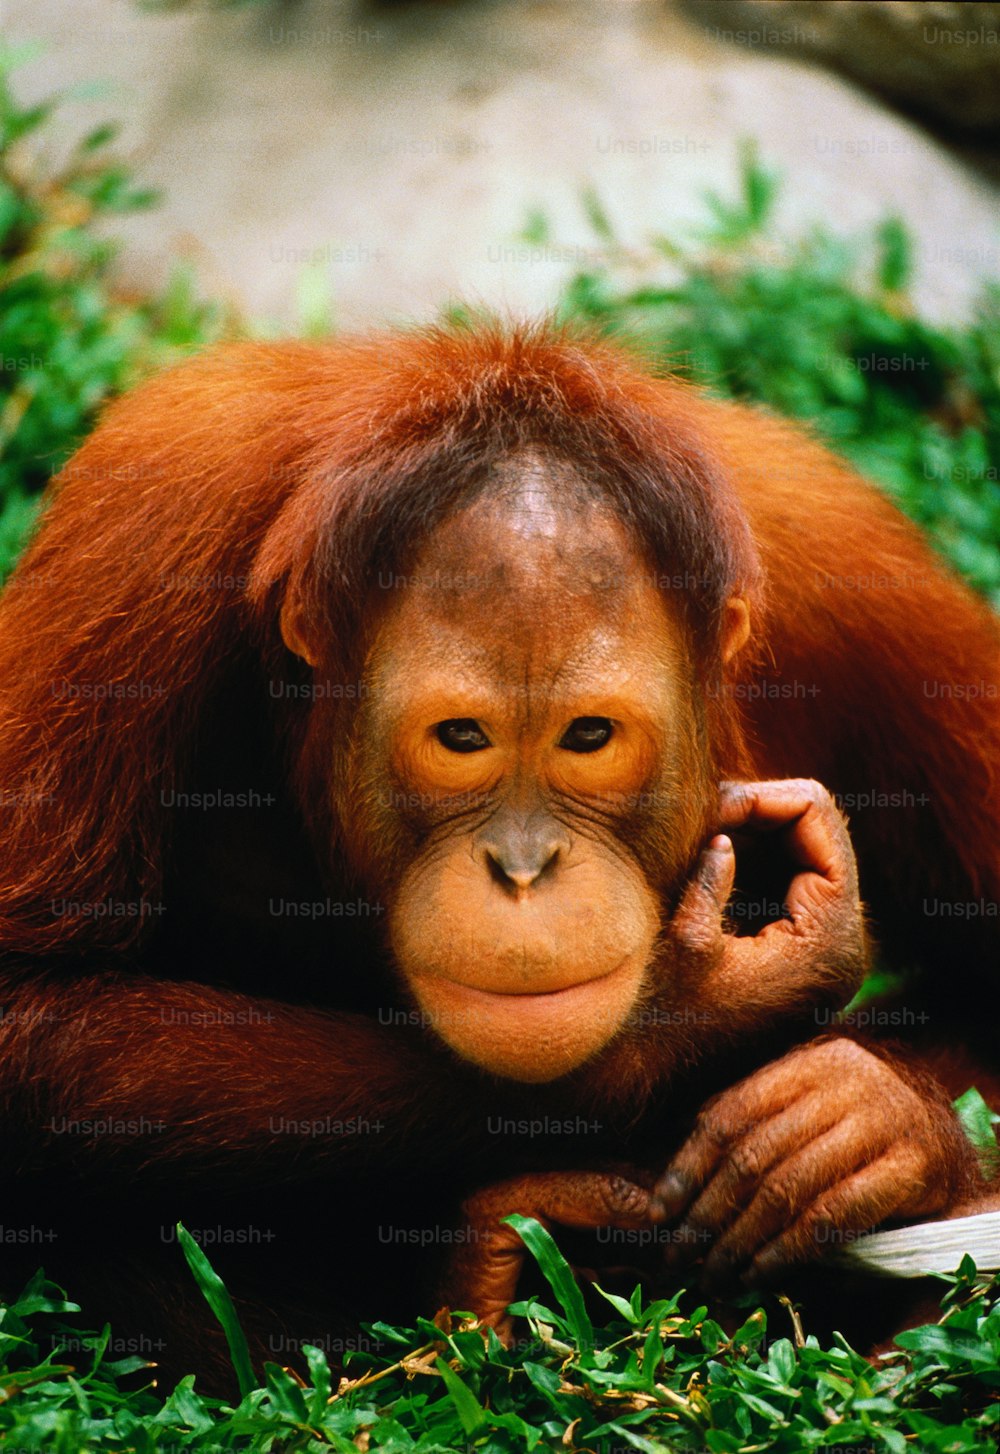 Captive,location unknown.Orang-utan is a Malay name meaning 'man of the forest'.Orang-utans spend the majority of their lives in trees;travelling in small groups by day,eating leaves and fruit,and nest at night.Native to the forests of Borneo and Sumatra.